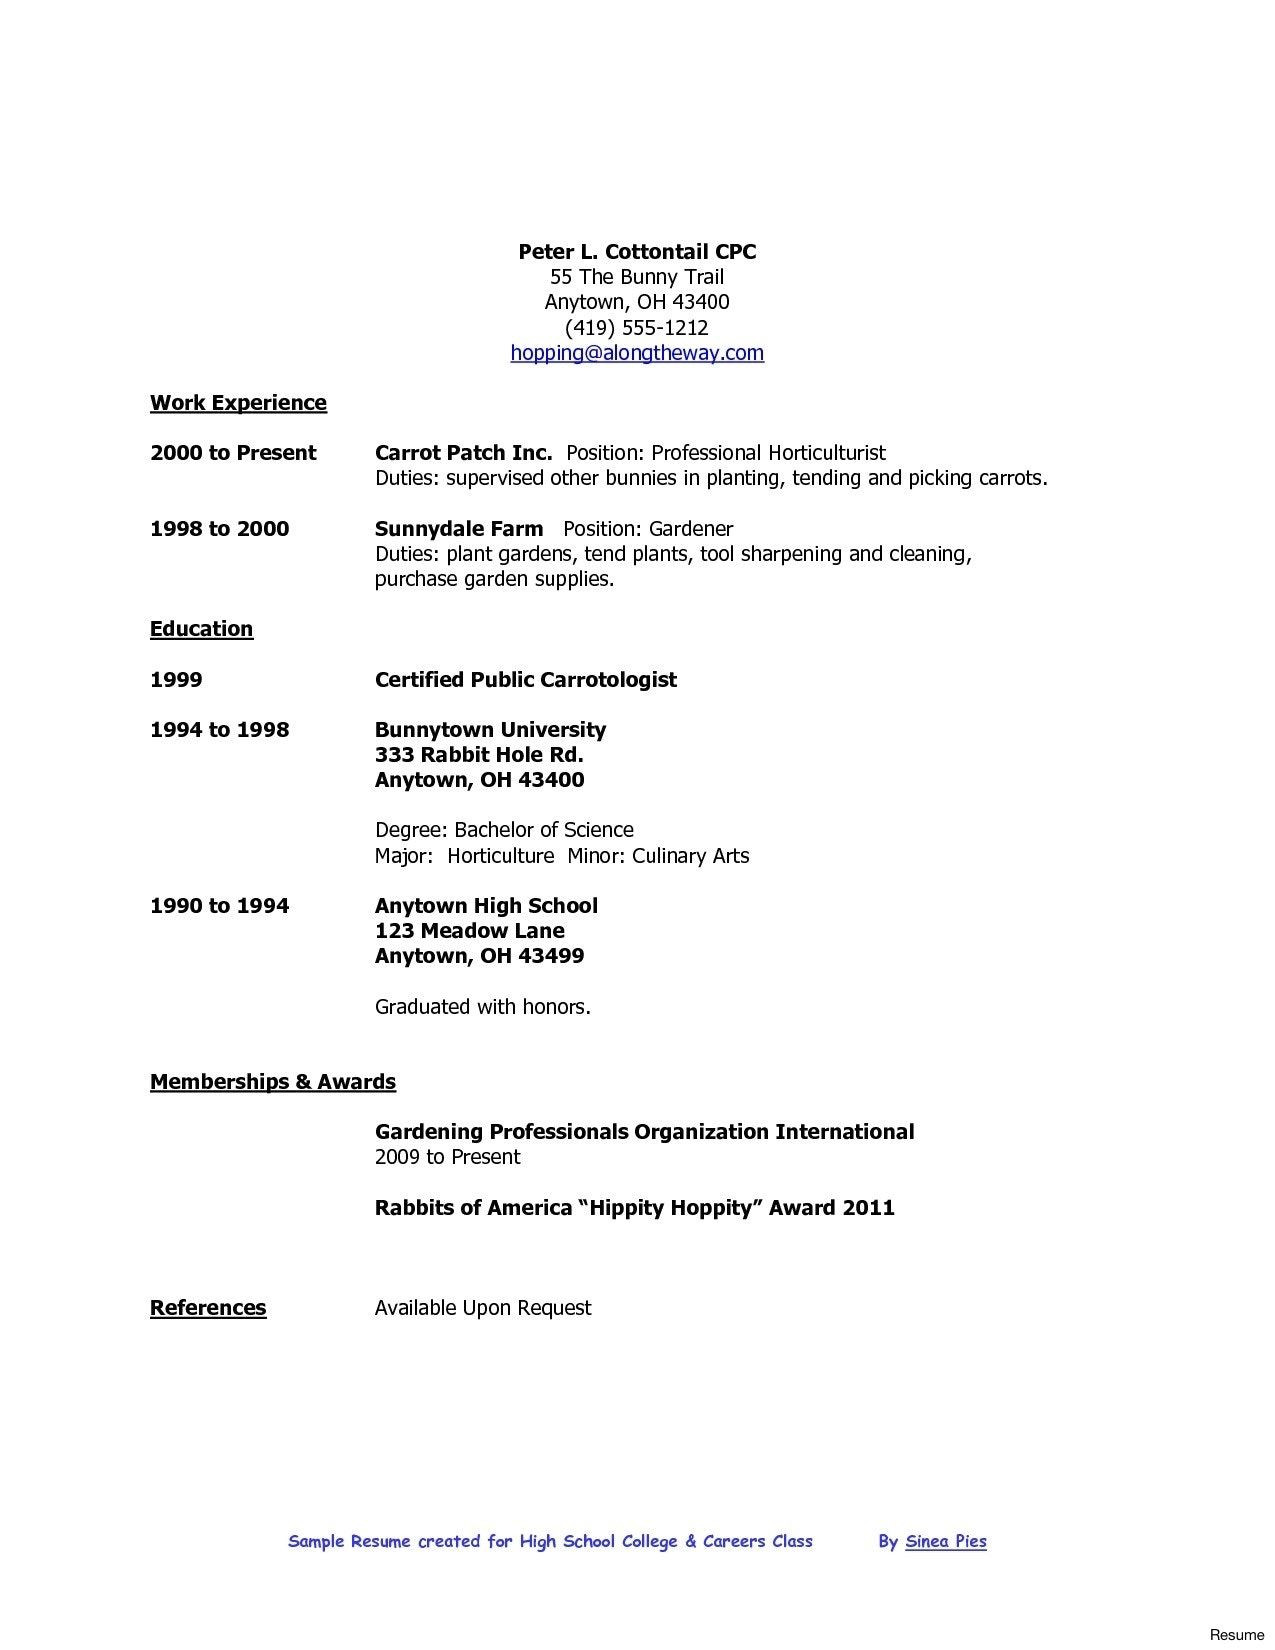 Sample Resume for High School Graduate with Little Experience Resume format High School Graduate , #format #graduate #resume …